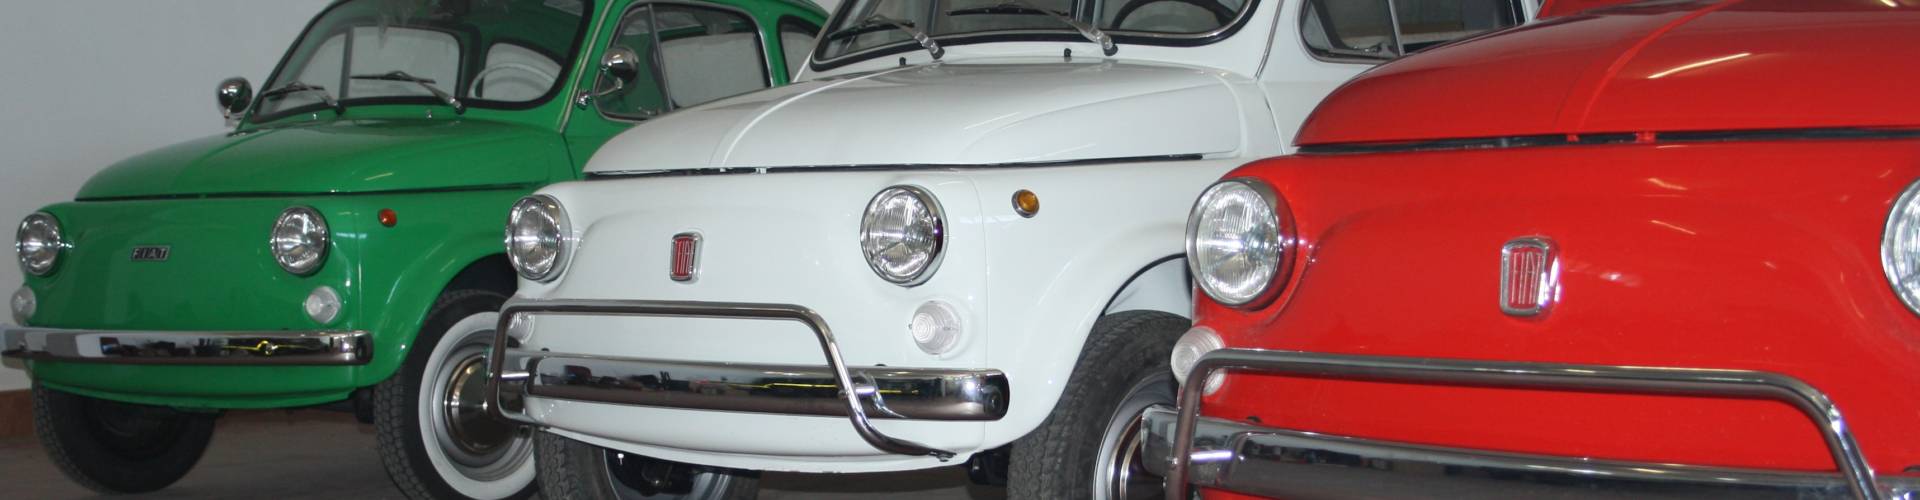 Denitto Classic Cars We Restore And Sell Classic Cars